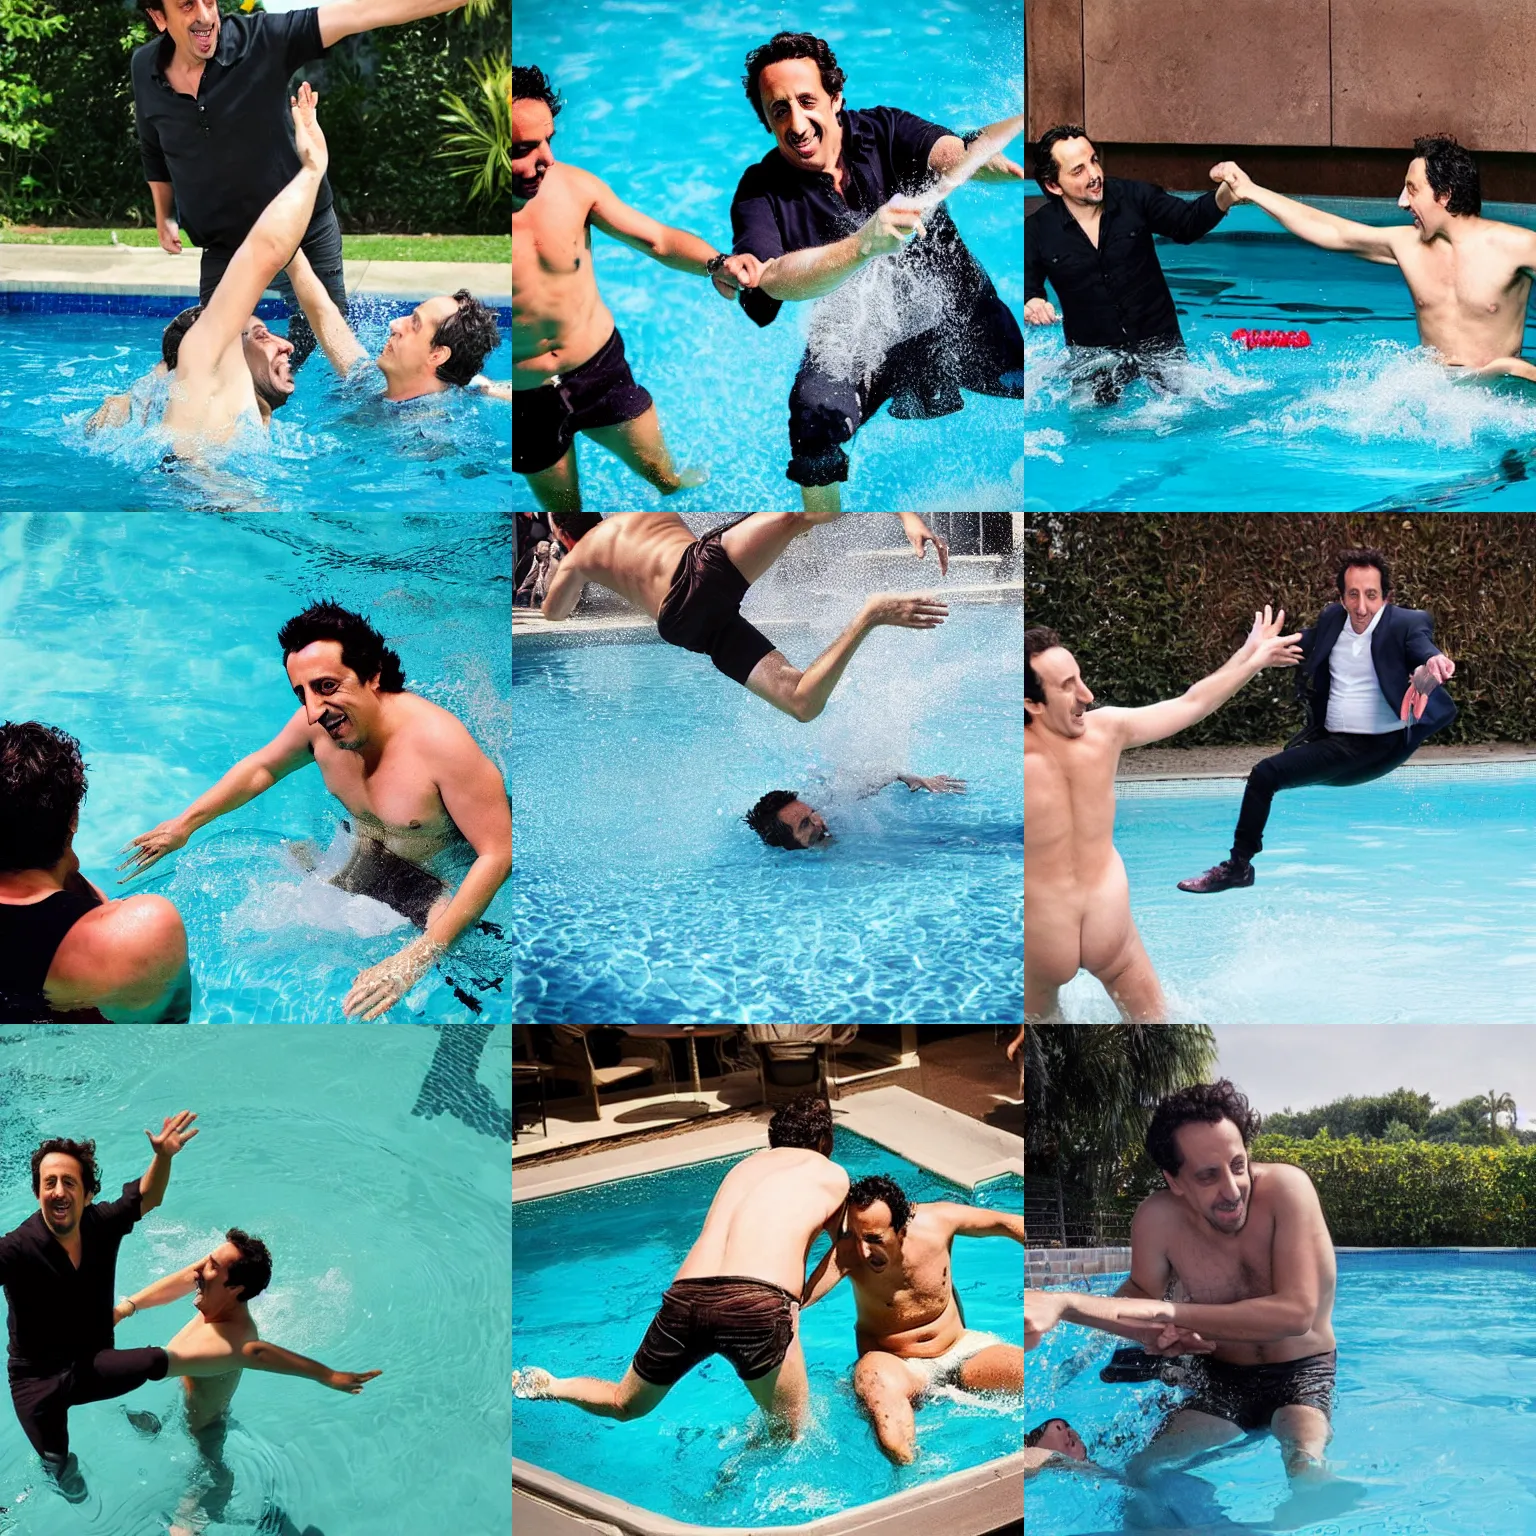 Prompt: Alexandre Astier throwing Gad Elmaleh in a pool, photograph